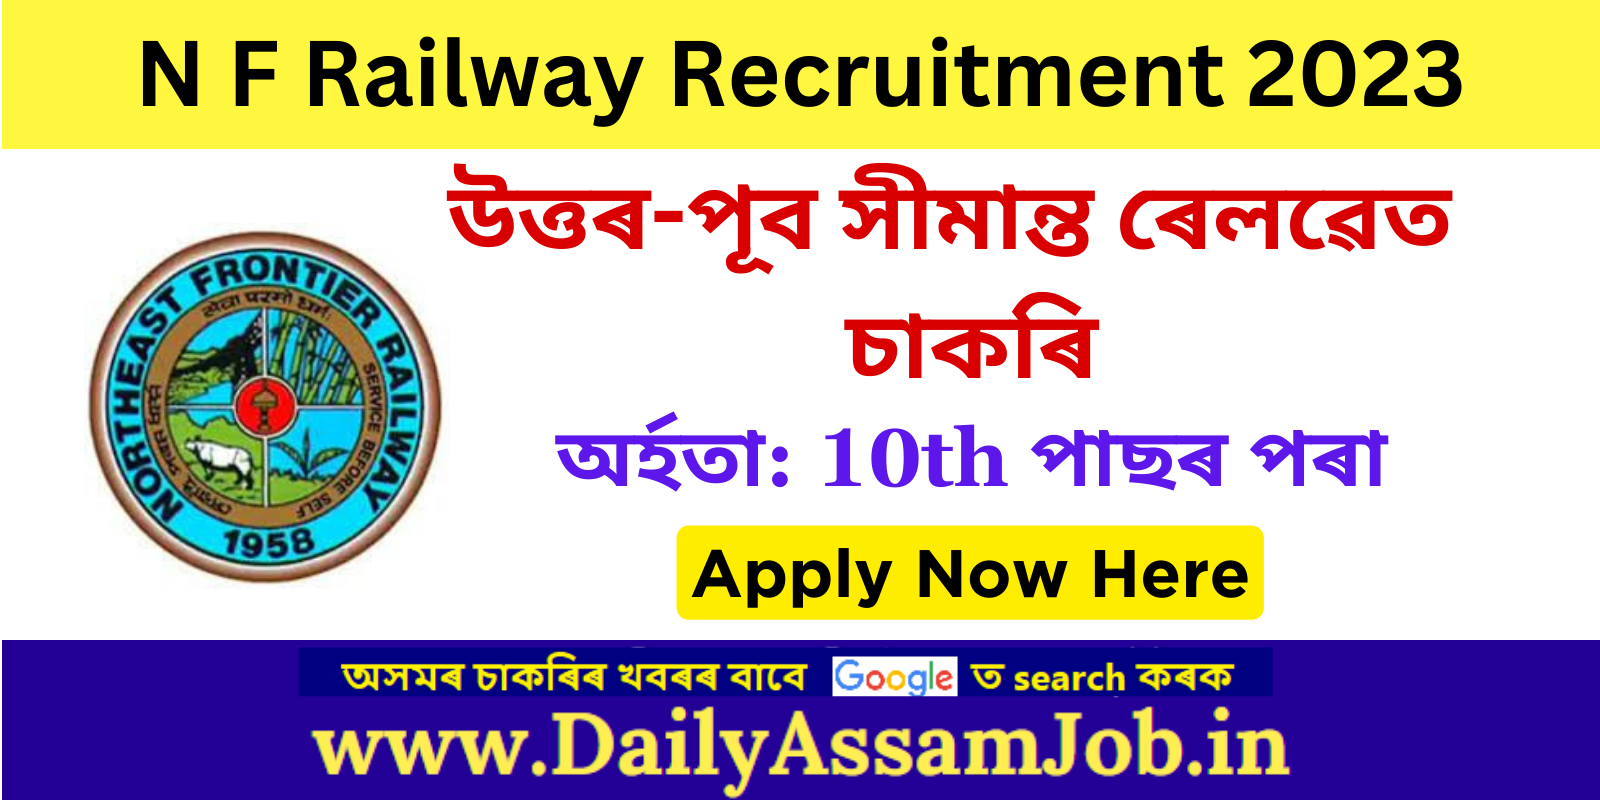 Assam Career :: N F Railway Recruitment 2023 for 12 Vacancy @ Scout & Guide Quota